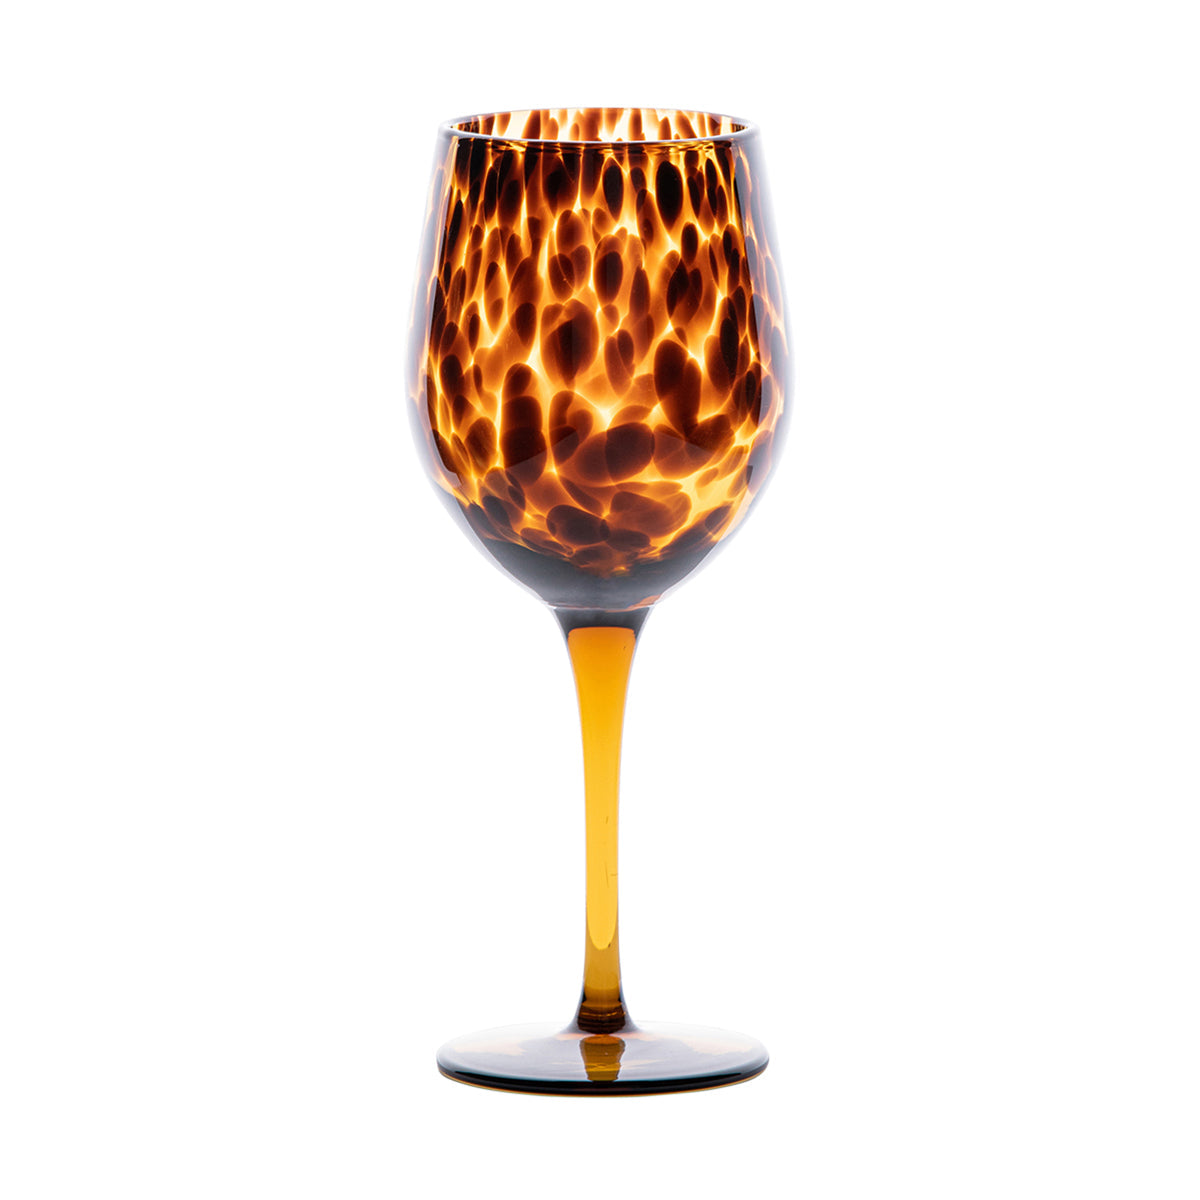 This richly hued tortoiseshell wine glass, with translucent brown body and dark specks, is a handsome glass from which to enjoy your favorite vintage. 